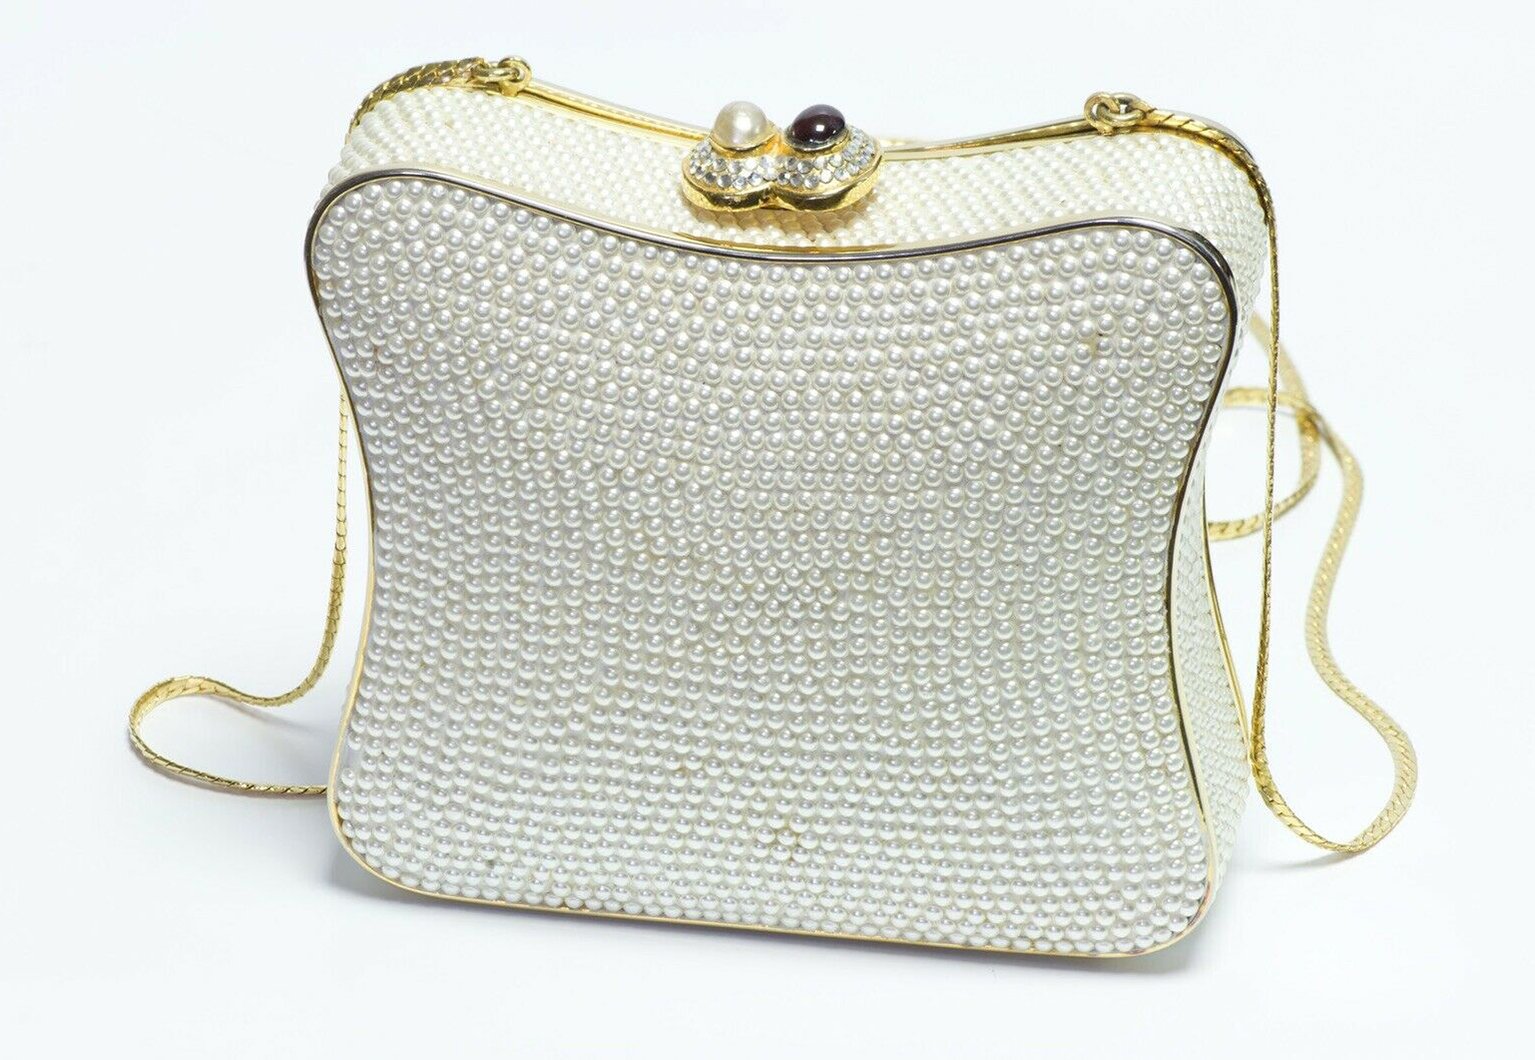 6 Judith Leiber Bags That Epitomize Her Unadulterated Love Of Kitsch – The  Forward